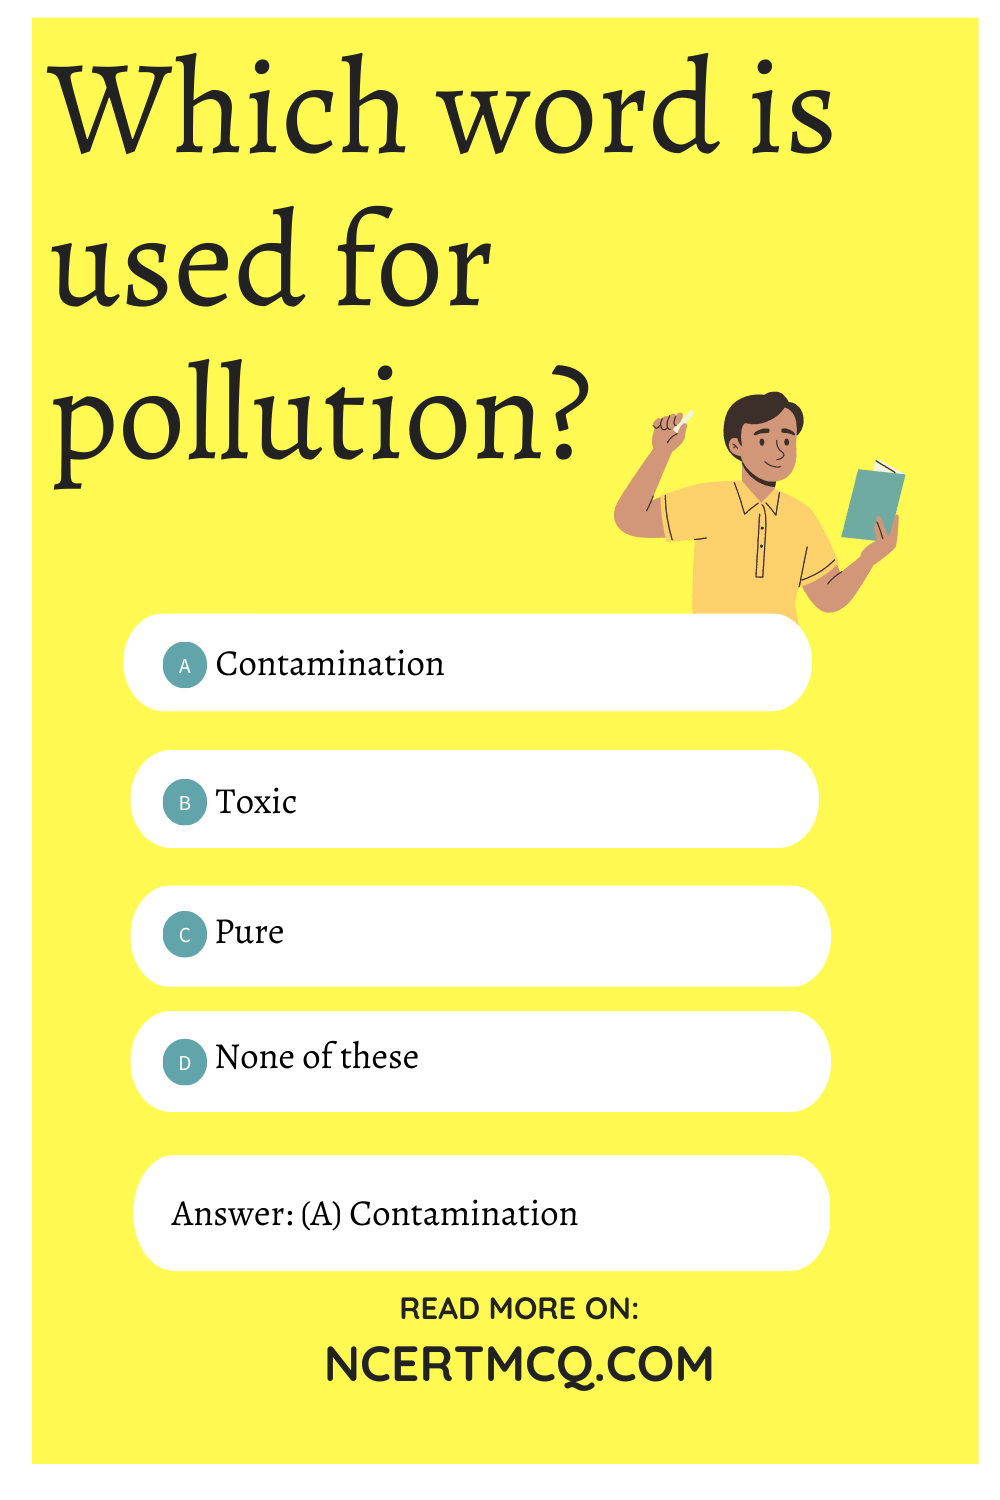 Which word is used for pollution?